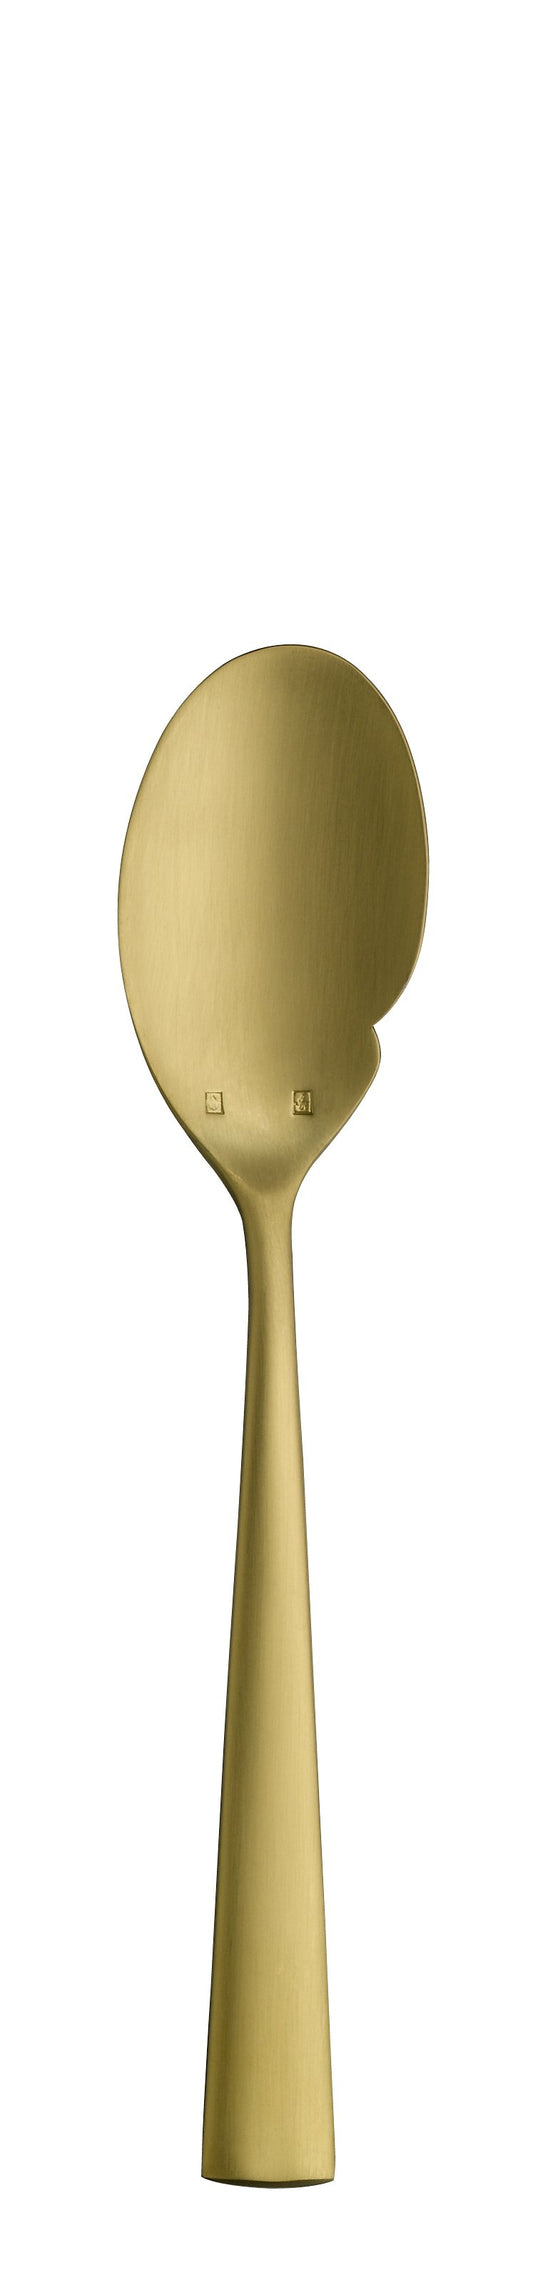 French sauce spoon ACCENT PVD gold brushed 183mm